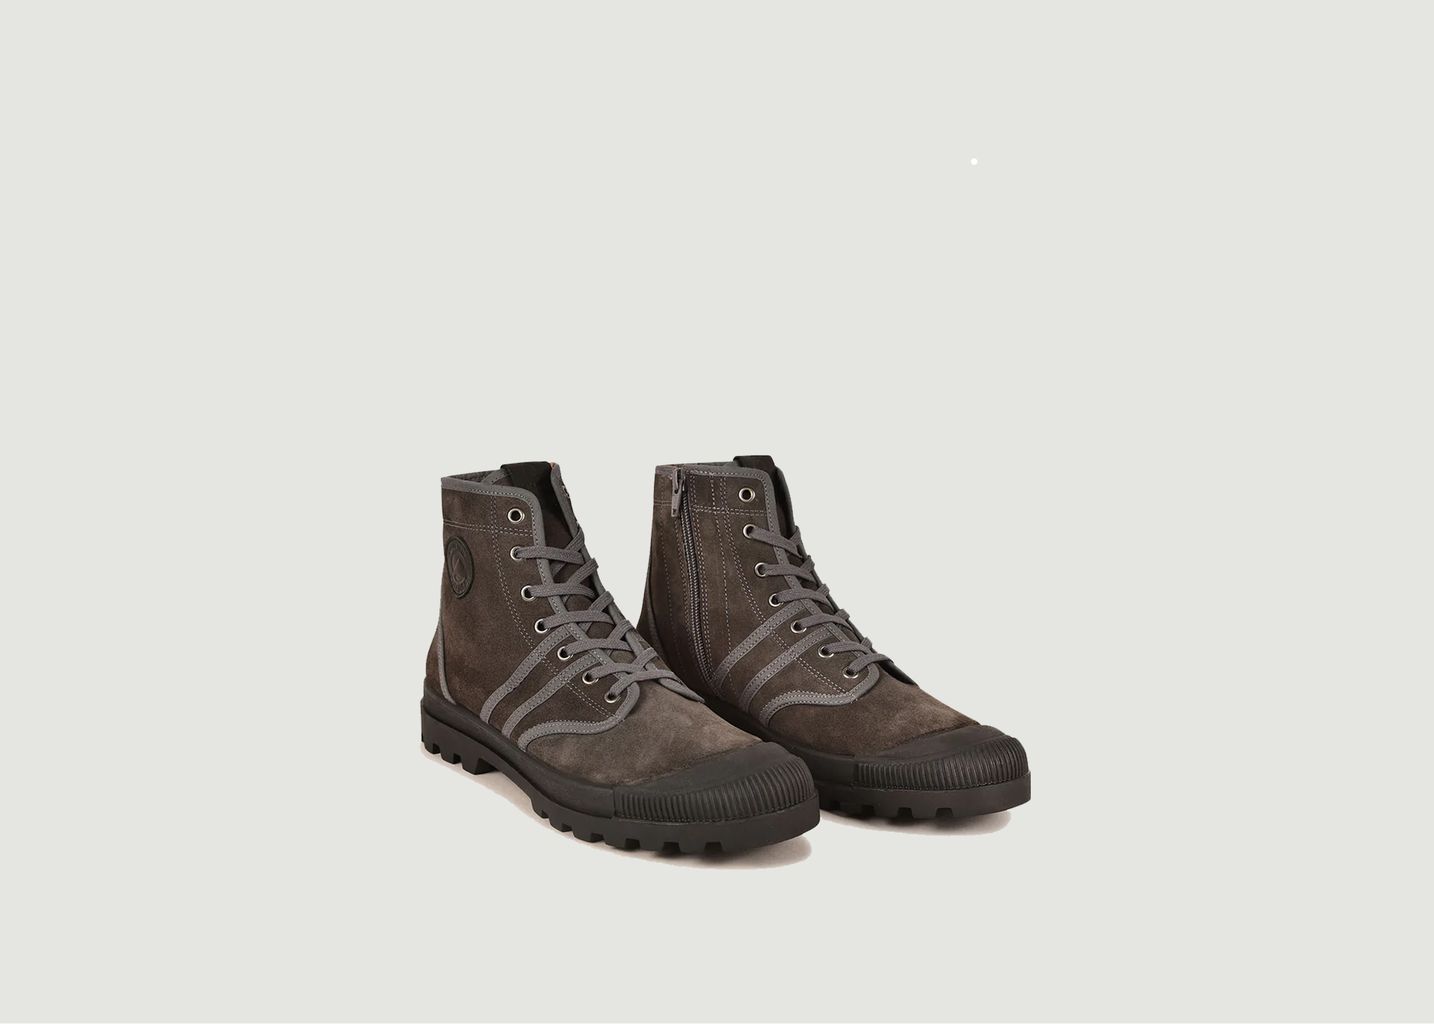 M/ZIPS H4H Boots - Pataugas